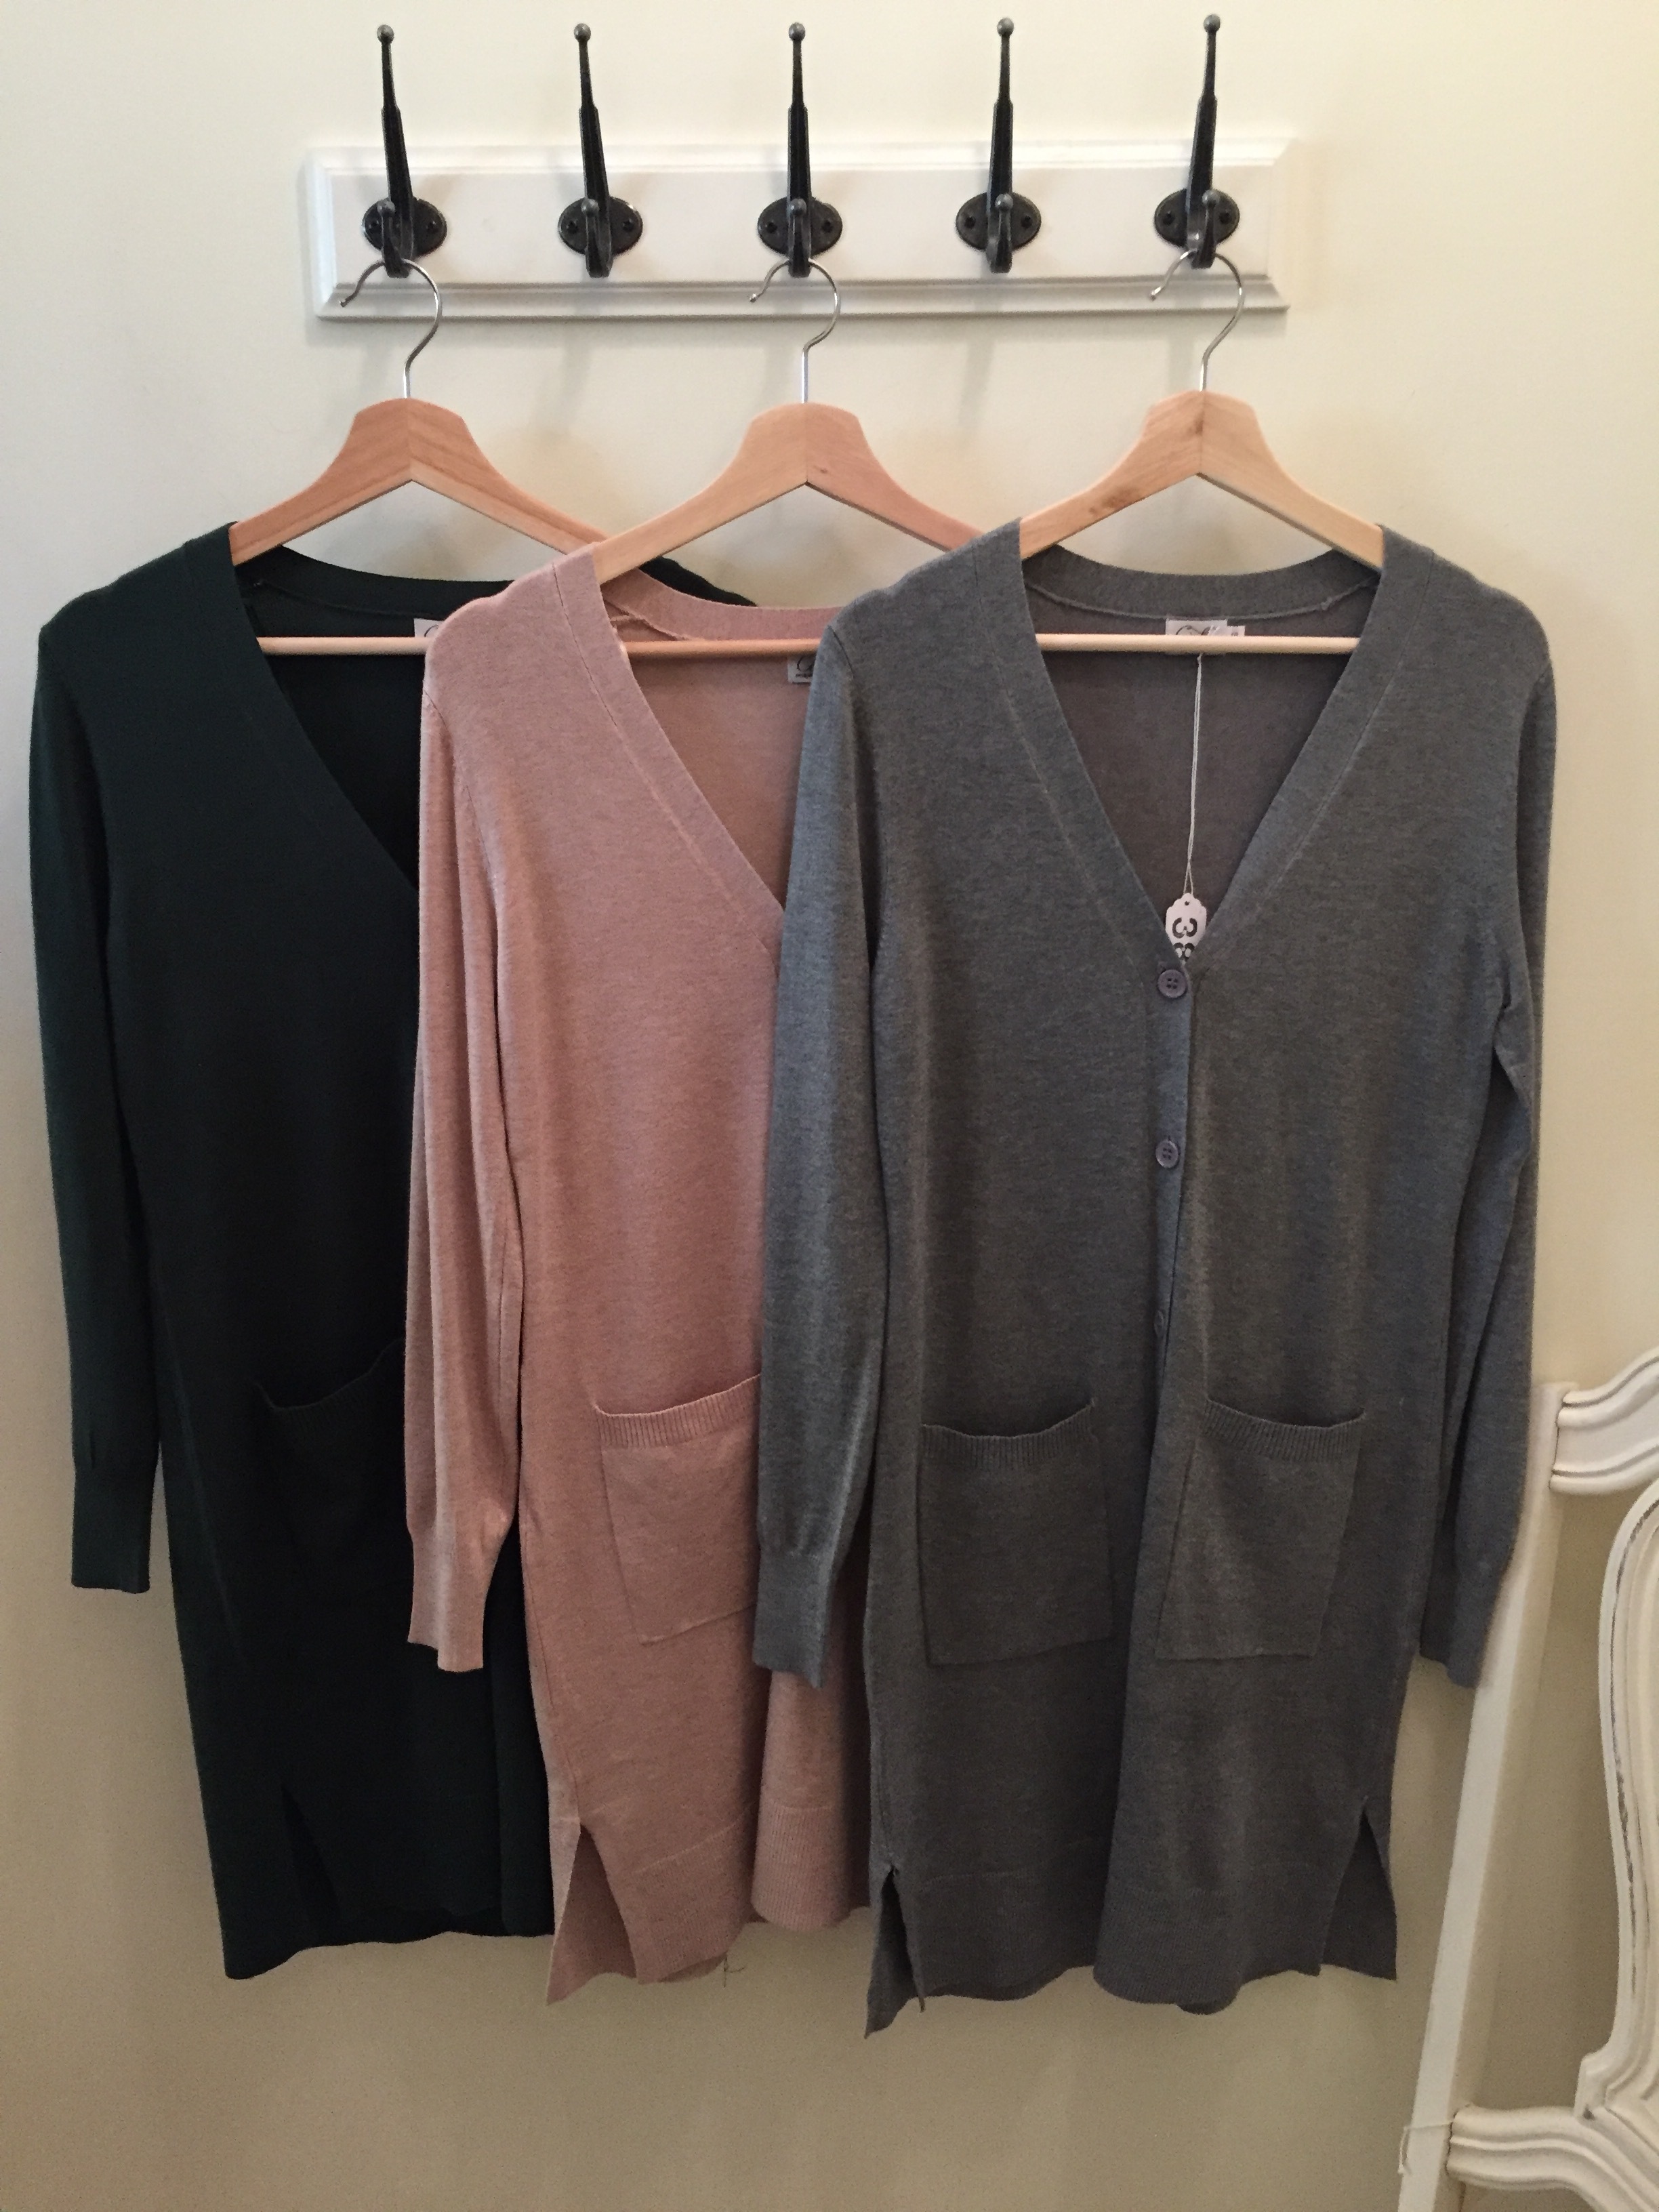 New Cielo Cardigans in various styles/ colors